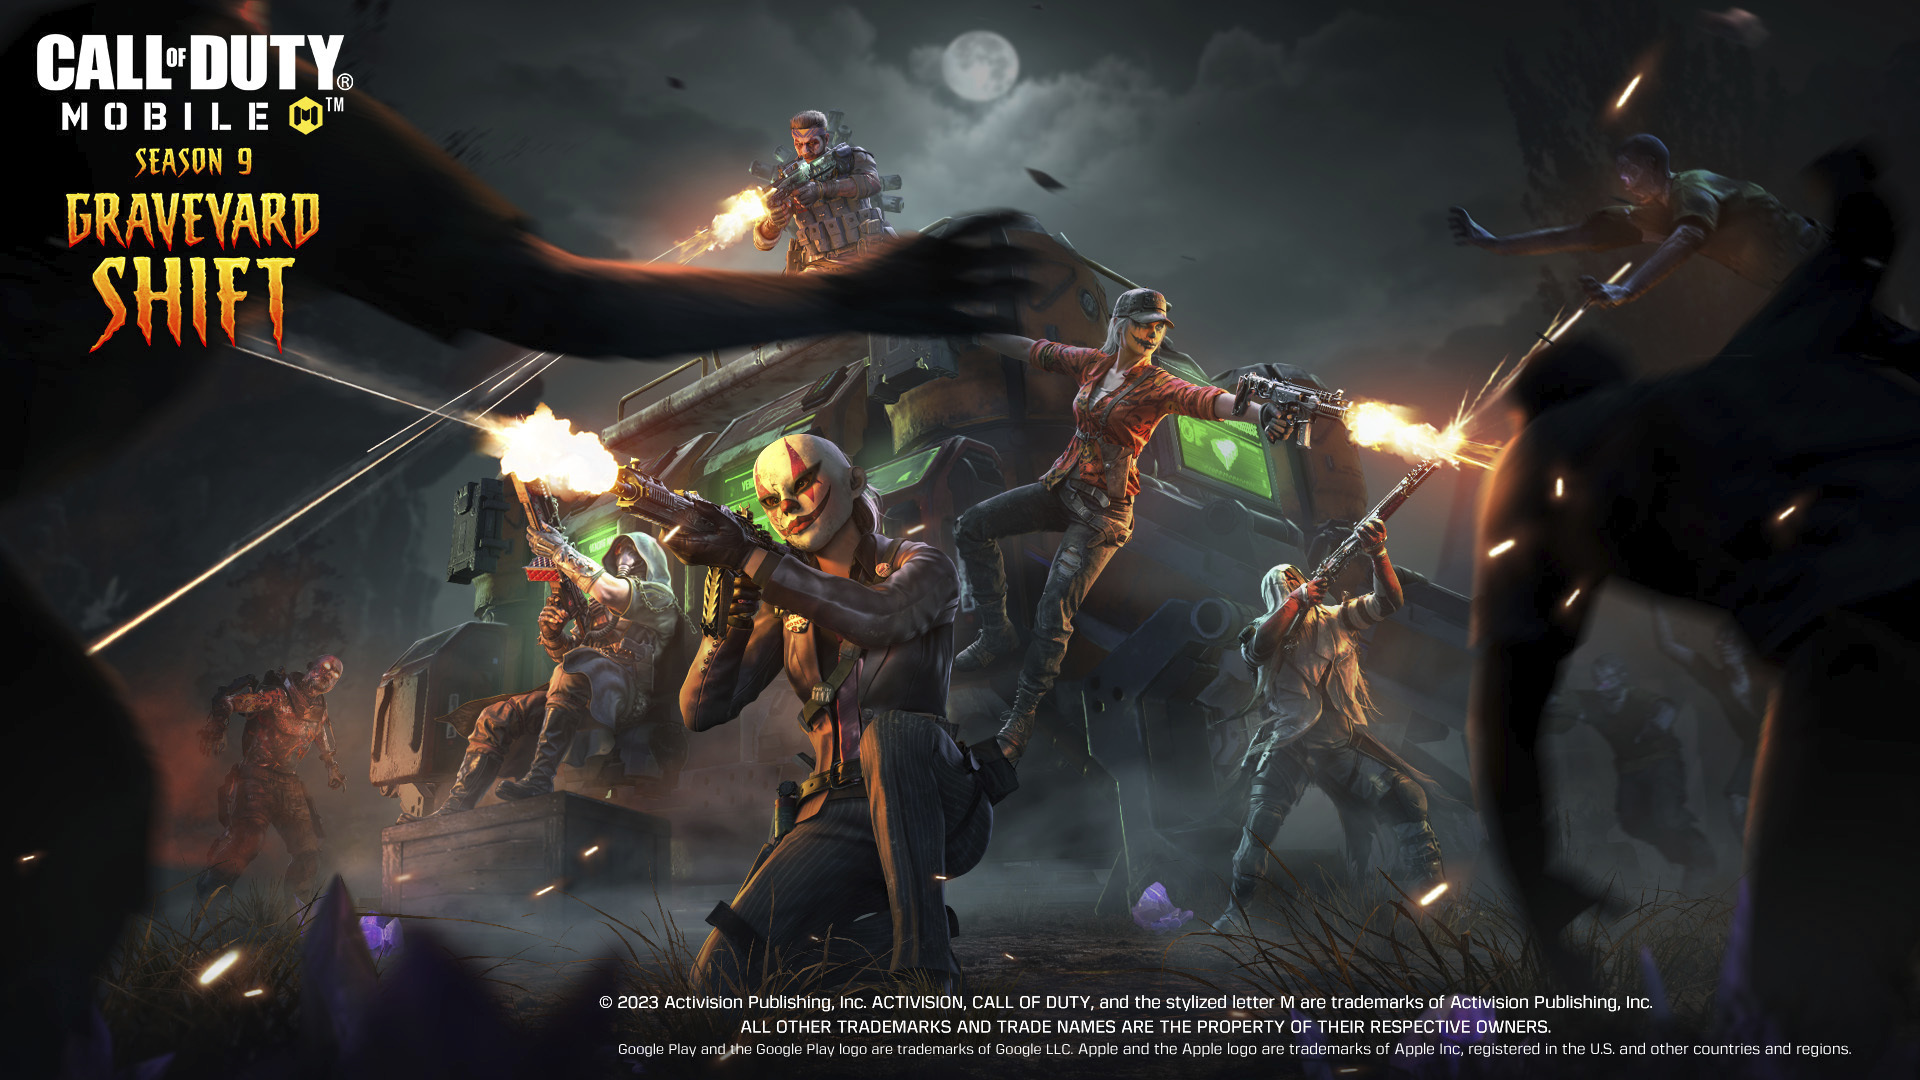 ¡Los zombies regresan a Call of Duty: Mobile! 20